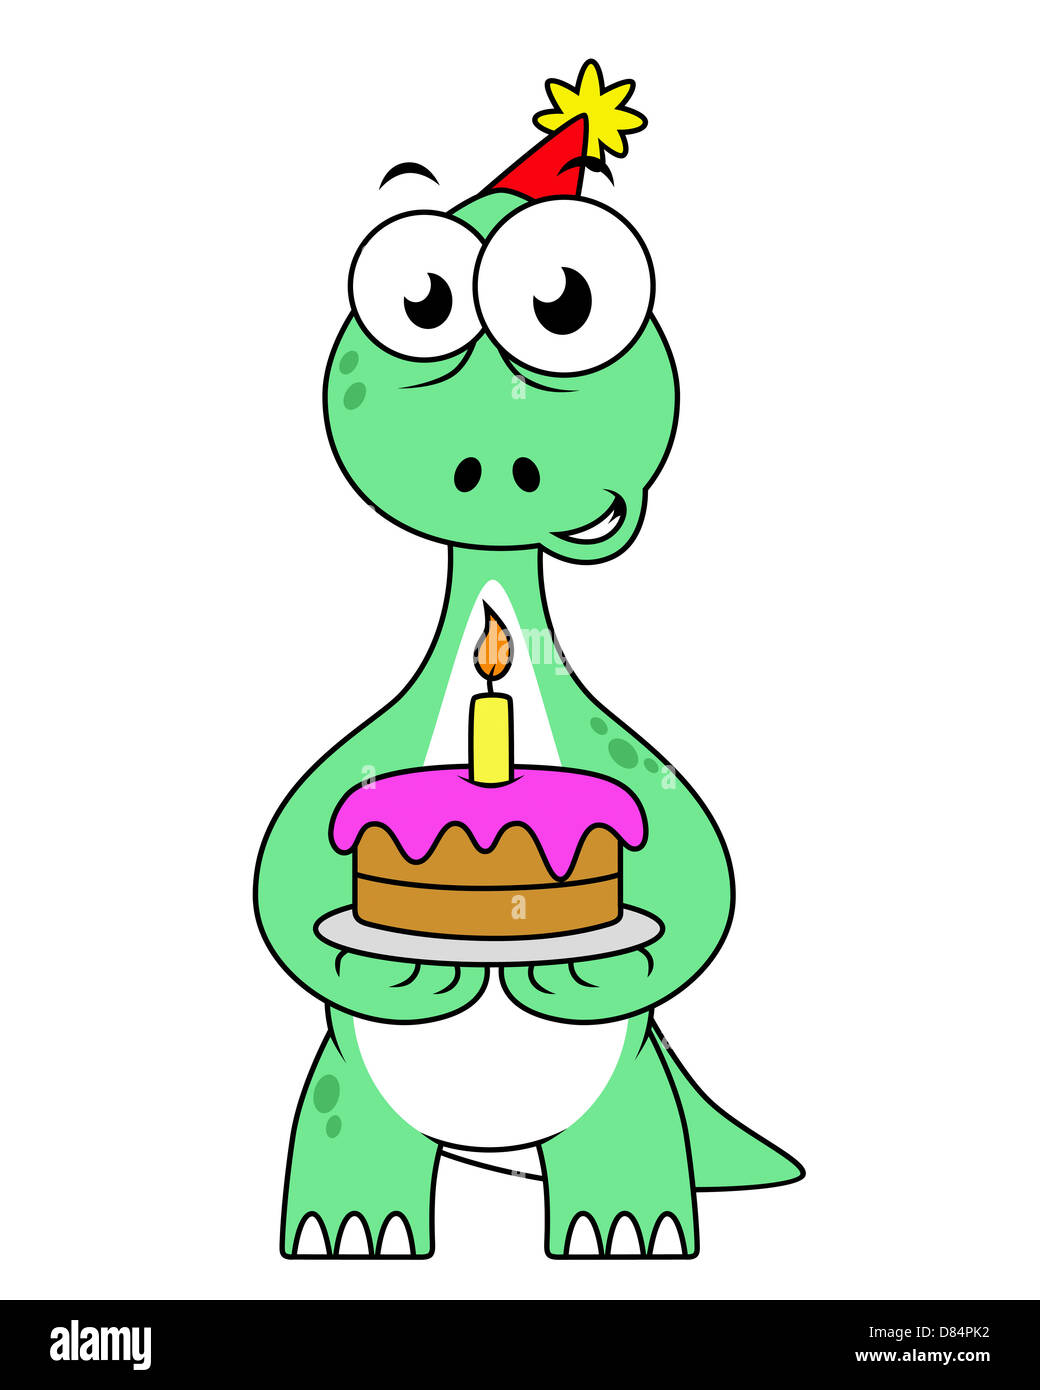 Illustration of a Brontosaurus with a birthday cake. Stock Photo